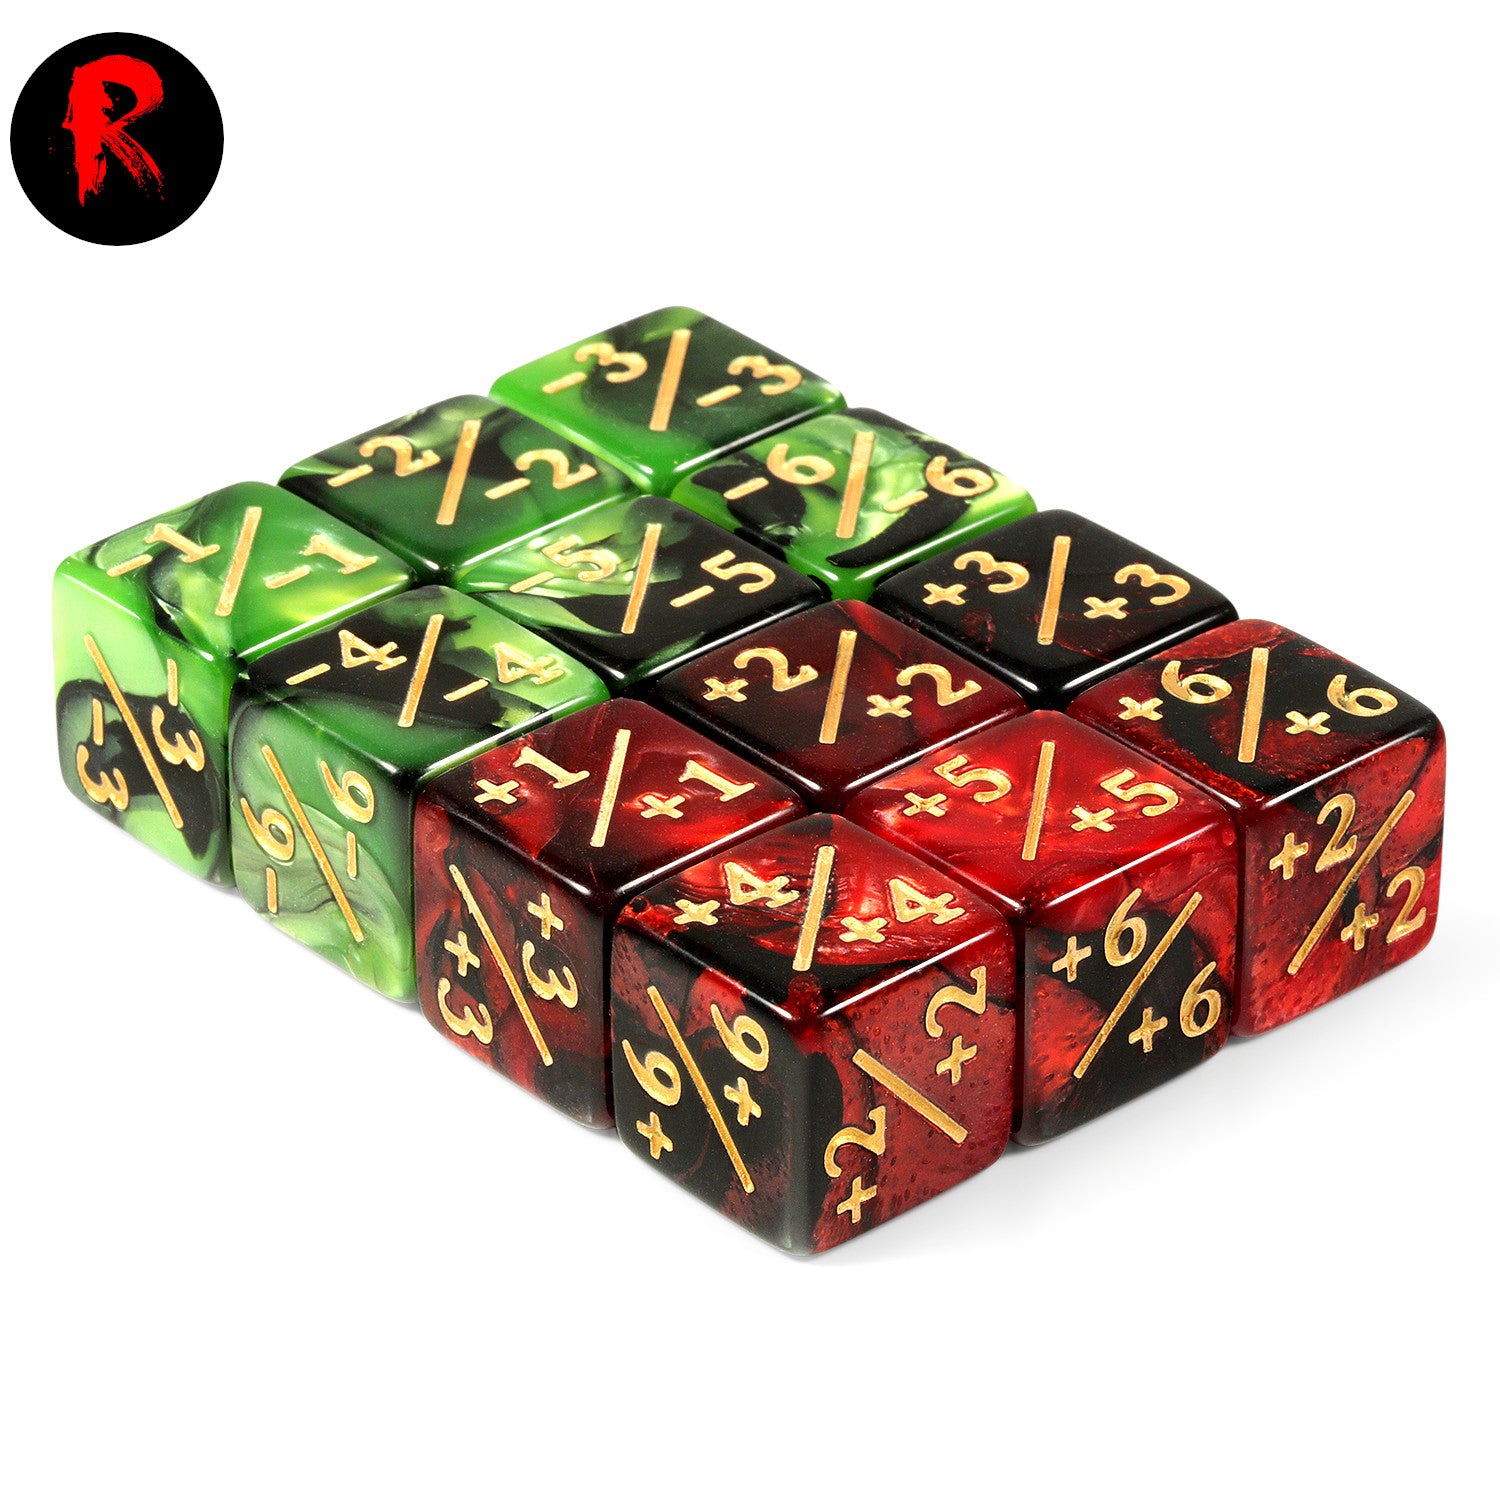 Dice Counters +1+/1 - Set of 12 Dice - Red & Green / Black - Ronin Games Dice PM005